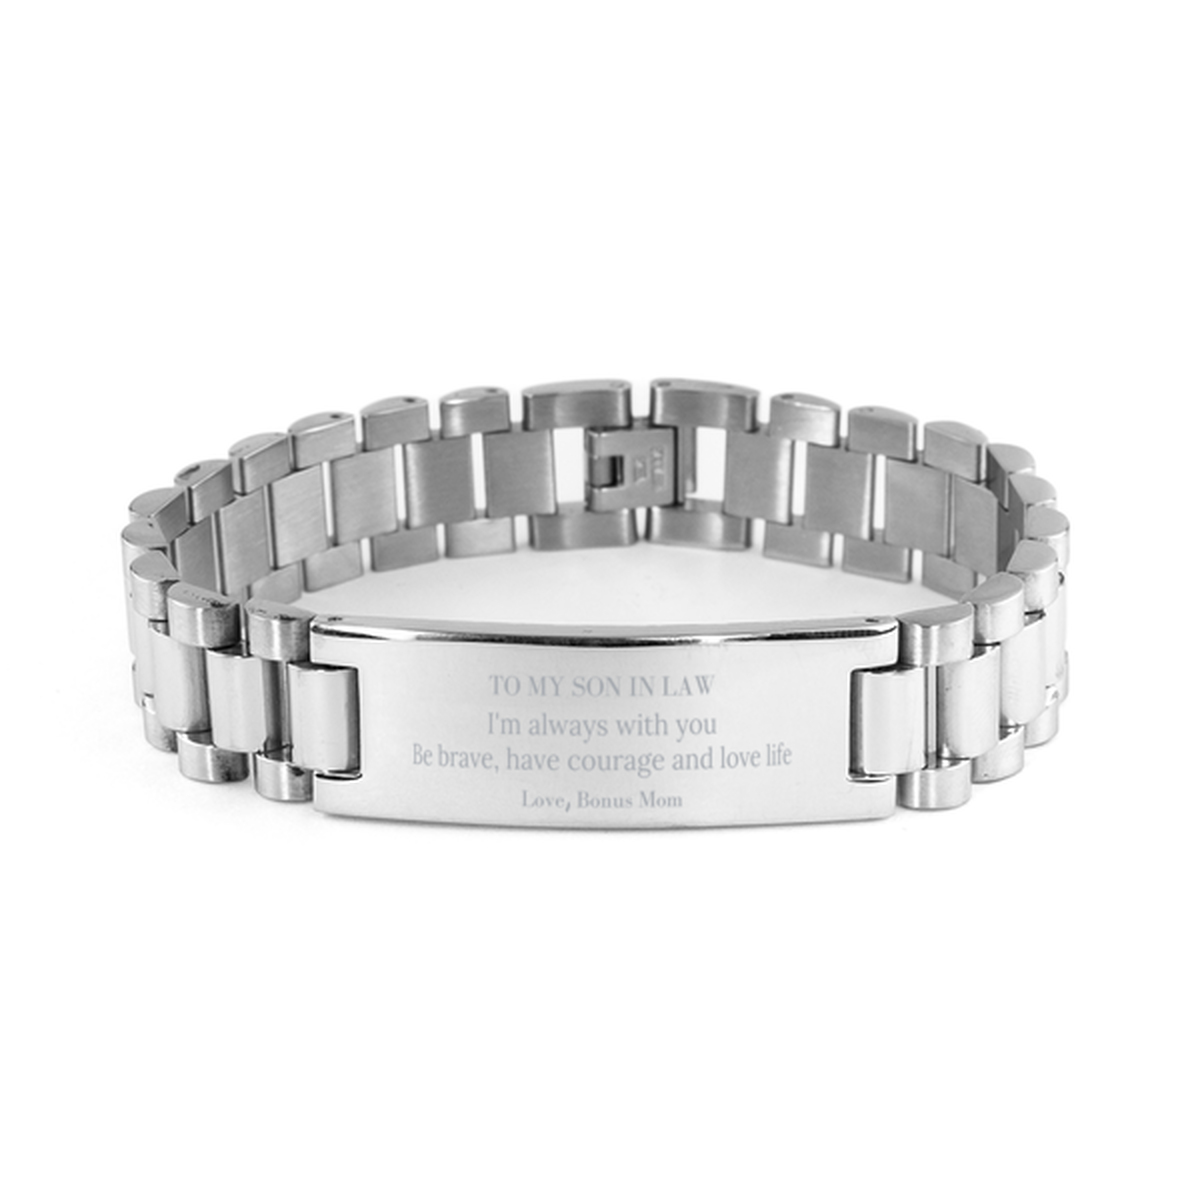 To My Son In Law Gifts from Bonus Mom, Unique Ladder Stainless Steel Bracelet Inspirational Christmas Birthday Graduation Gifts for Son In Law I'm always with you. Be brave, have courage and love life. Love, Bonus Mom